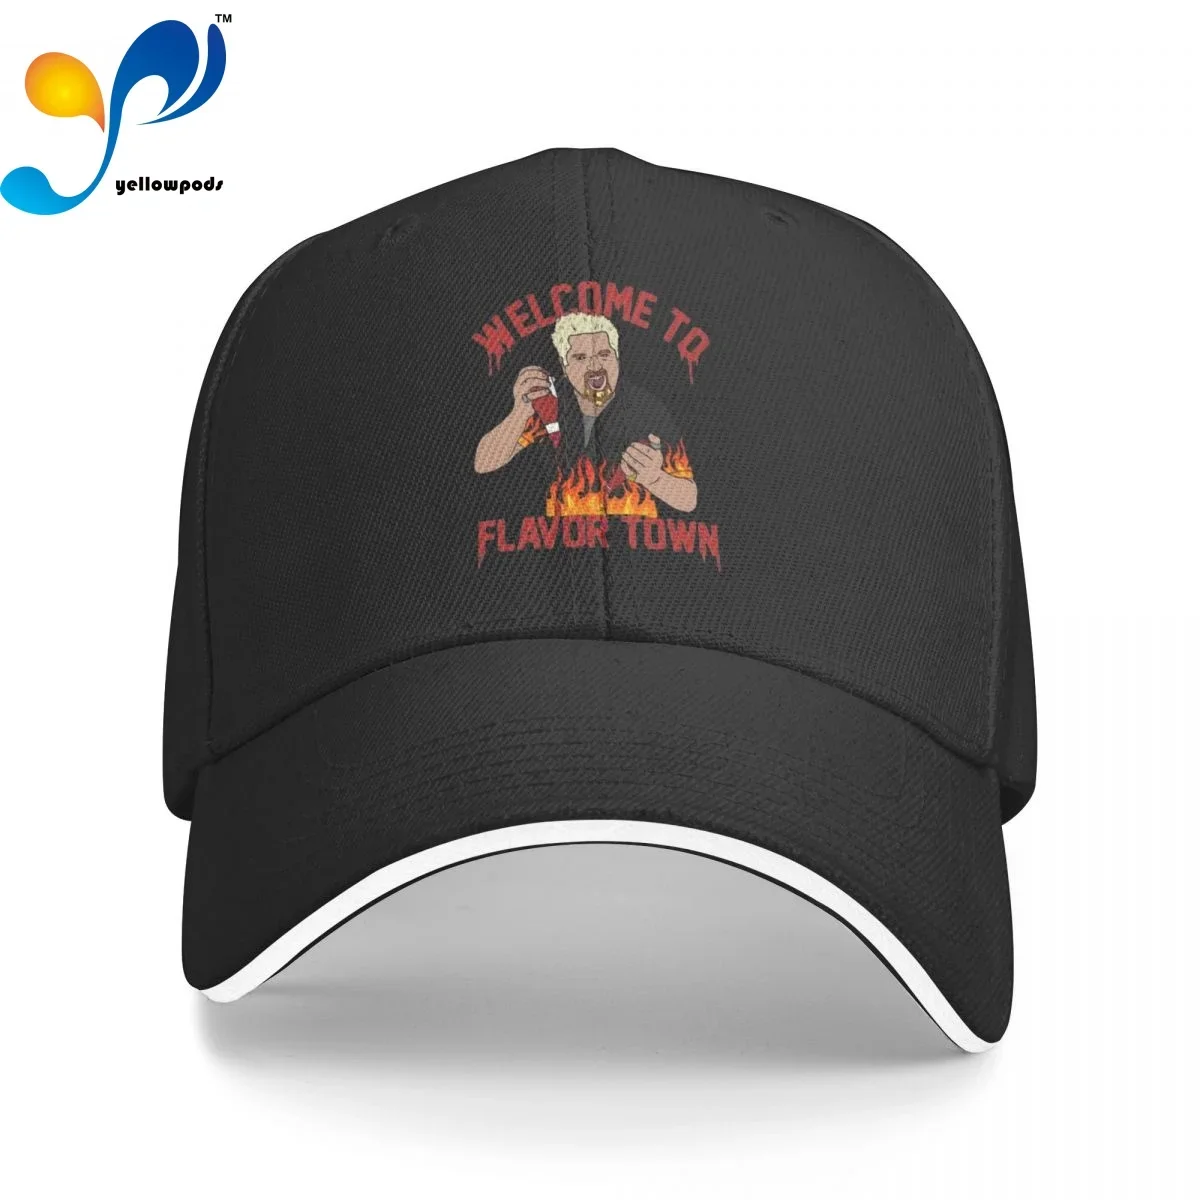 

Welcome To Flavortown Baseball Hat Unisex Adjustable Baseball Caps Hats for Men and Women